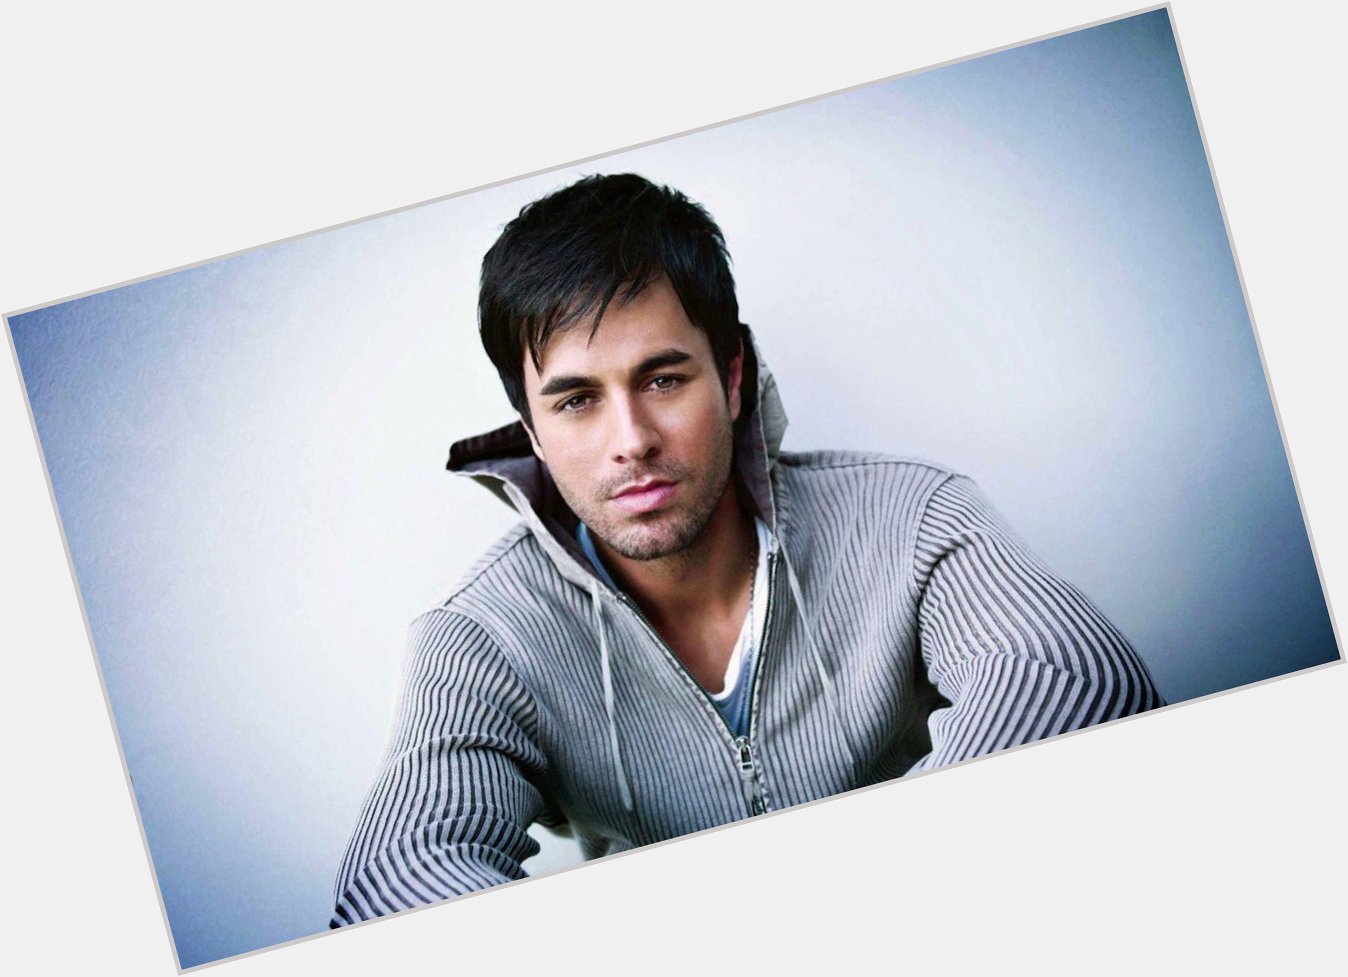 HAPPY 42ND BIRTHDAY TO
ENRIQUE IGLESIAS!

Enrique hits Toronto 2 concerts July 6 and October 4 @ the ACC! 